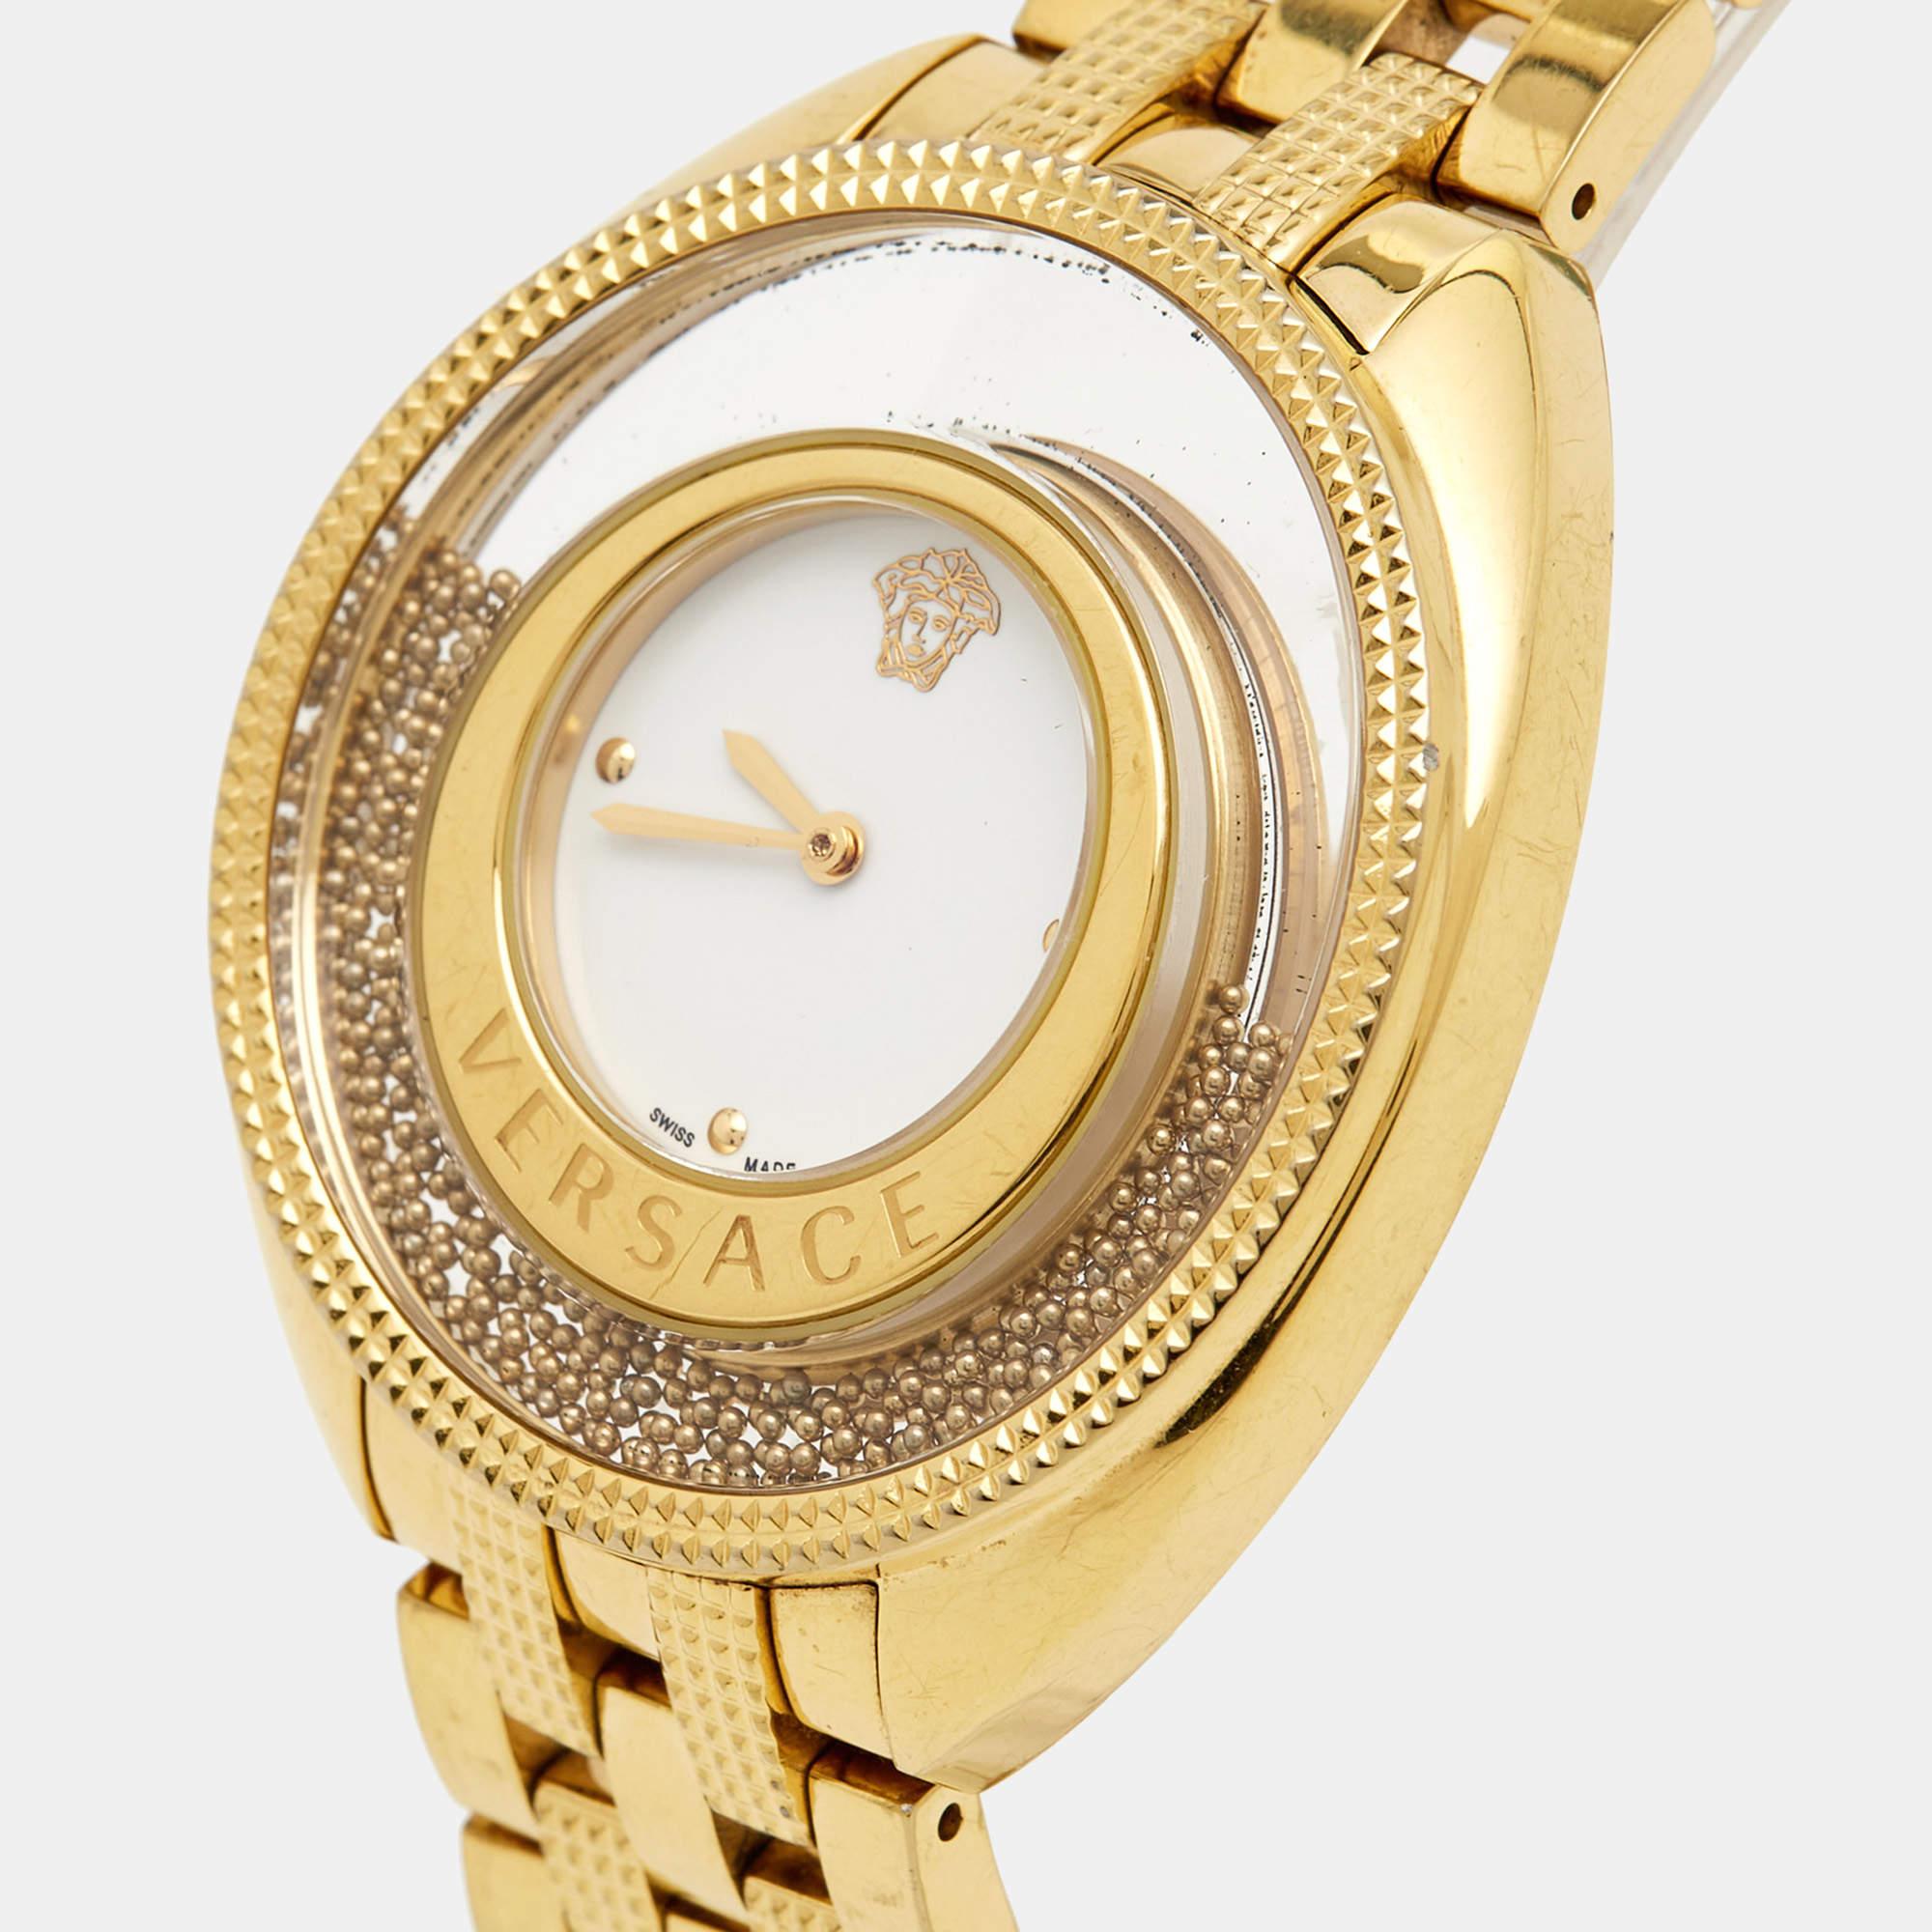 This designer watch is characterized by its skillful craftsmanship and understated charm. Meticulously constructed to tell time in an elegant way, it comes in a sturdy case and flaunts a seamless blend of innovative design and flawless